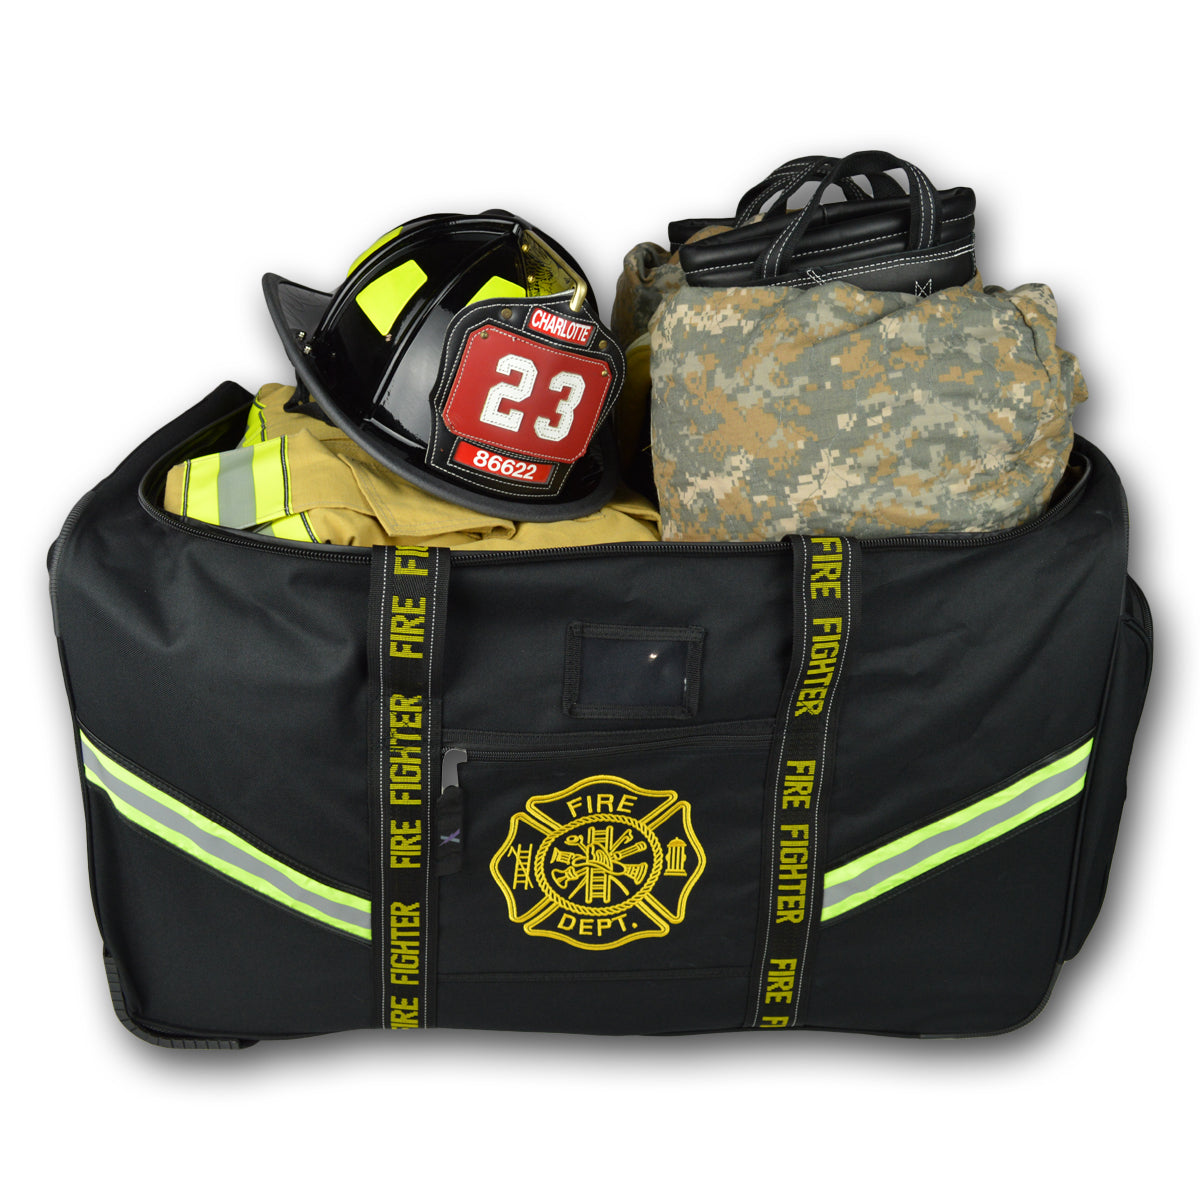 Firefighter Bags - Fire Safety USA